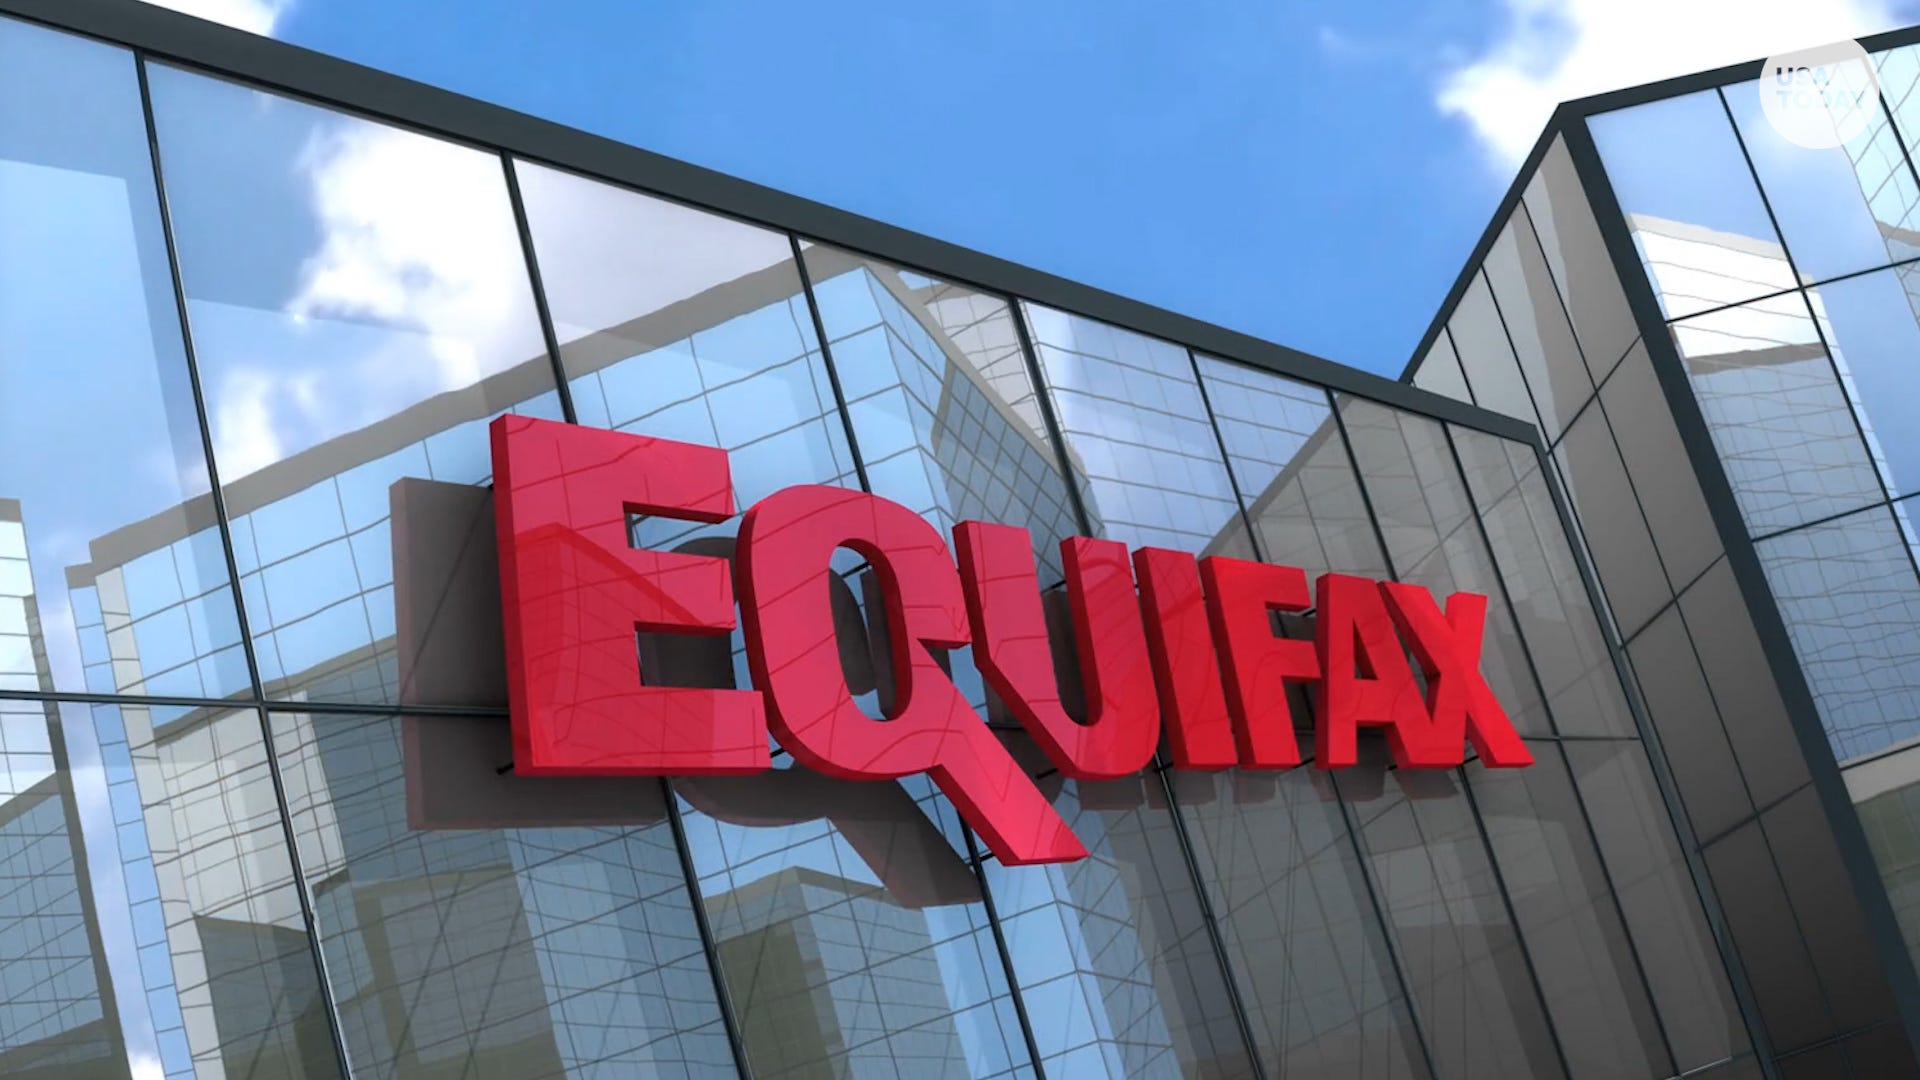 Equifax can't pay full $125 in breach settlement claims